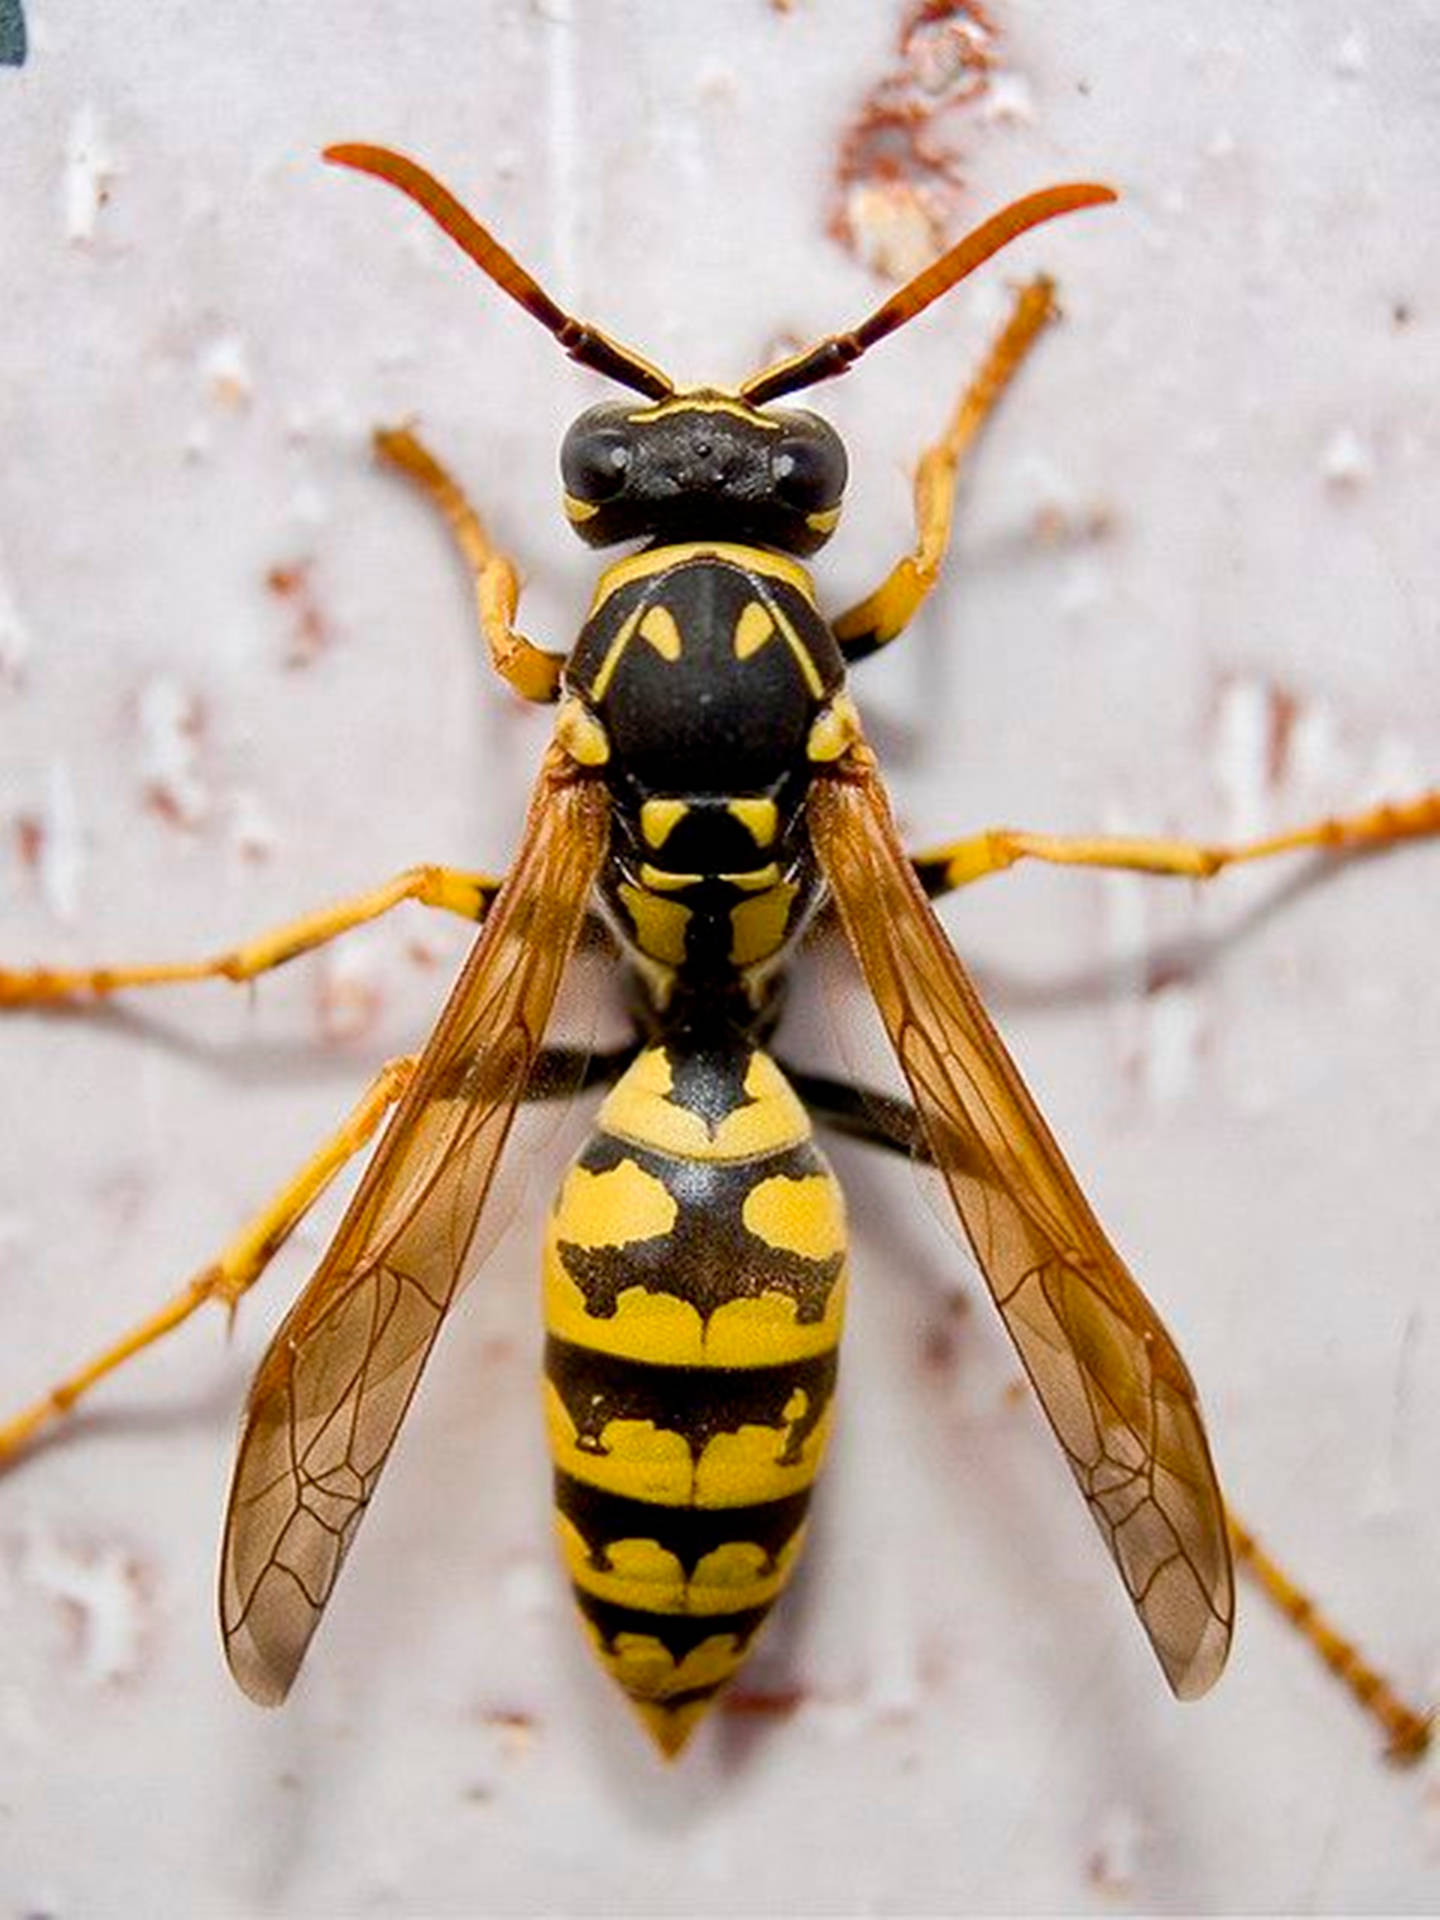 Wasp With Black And Yellow Patterns Wallpaper